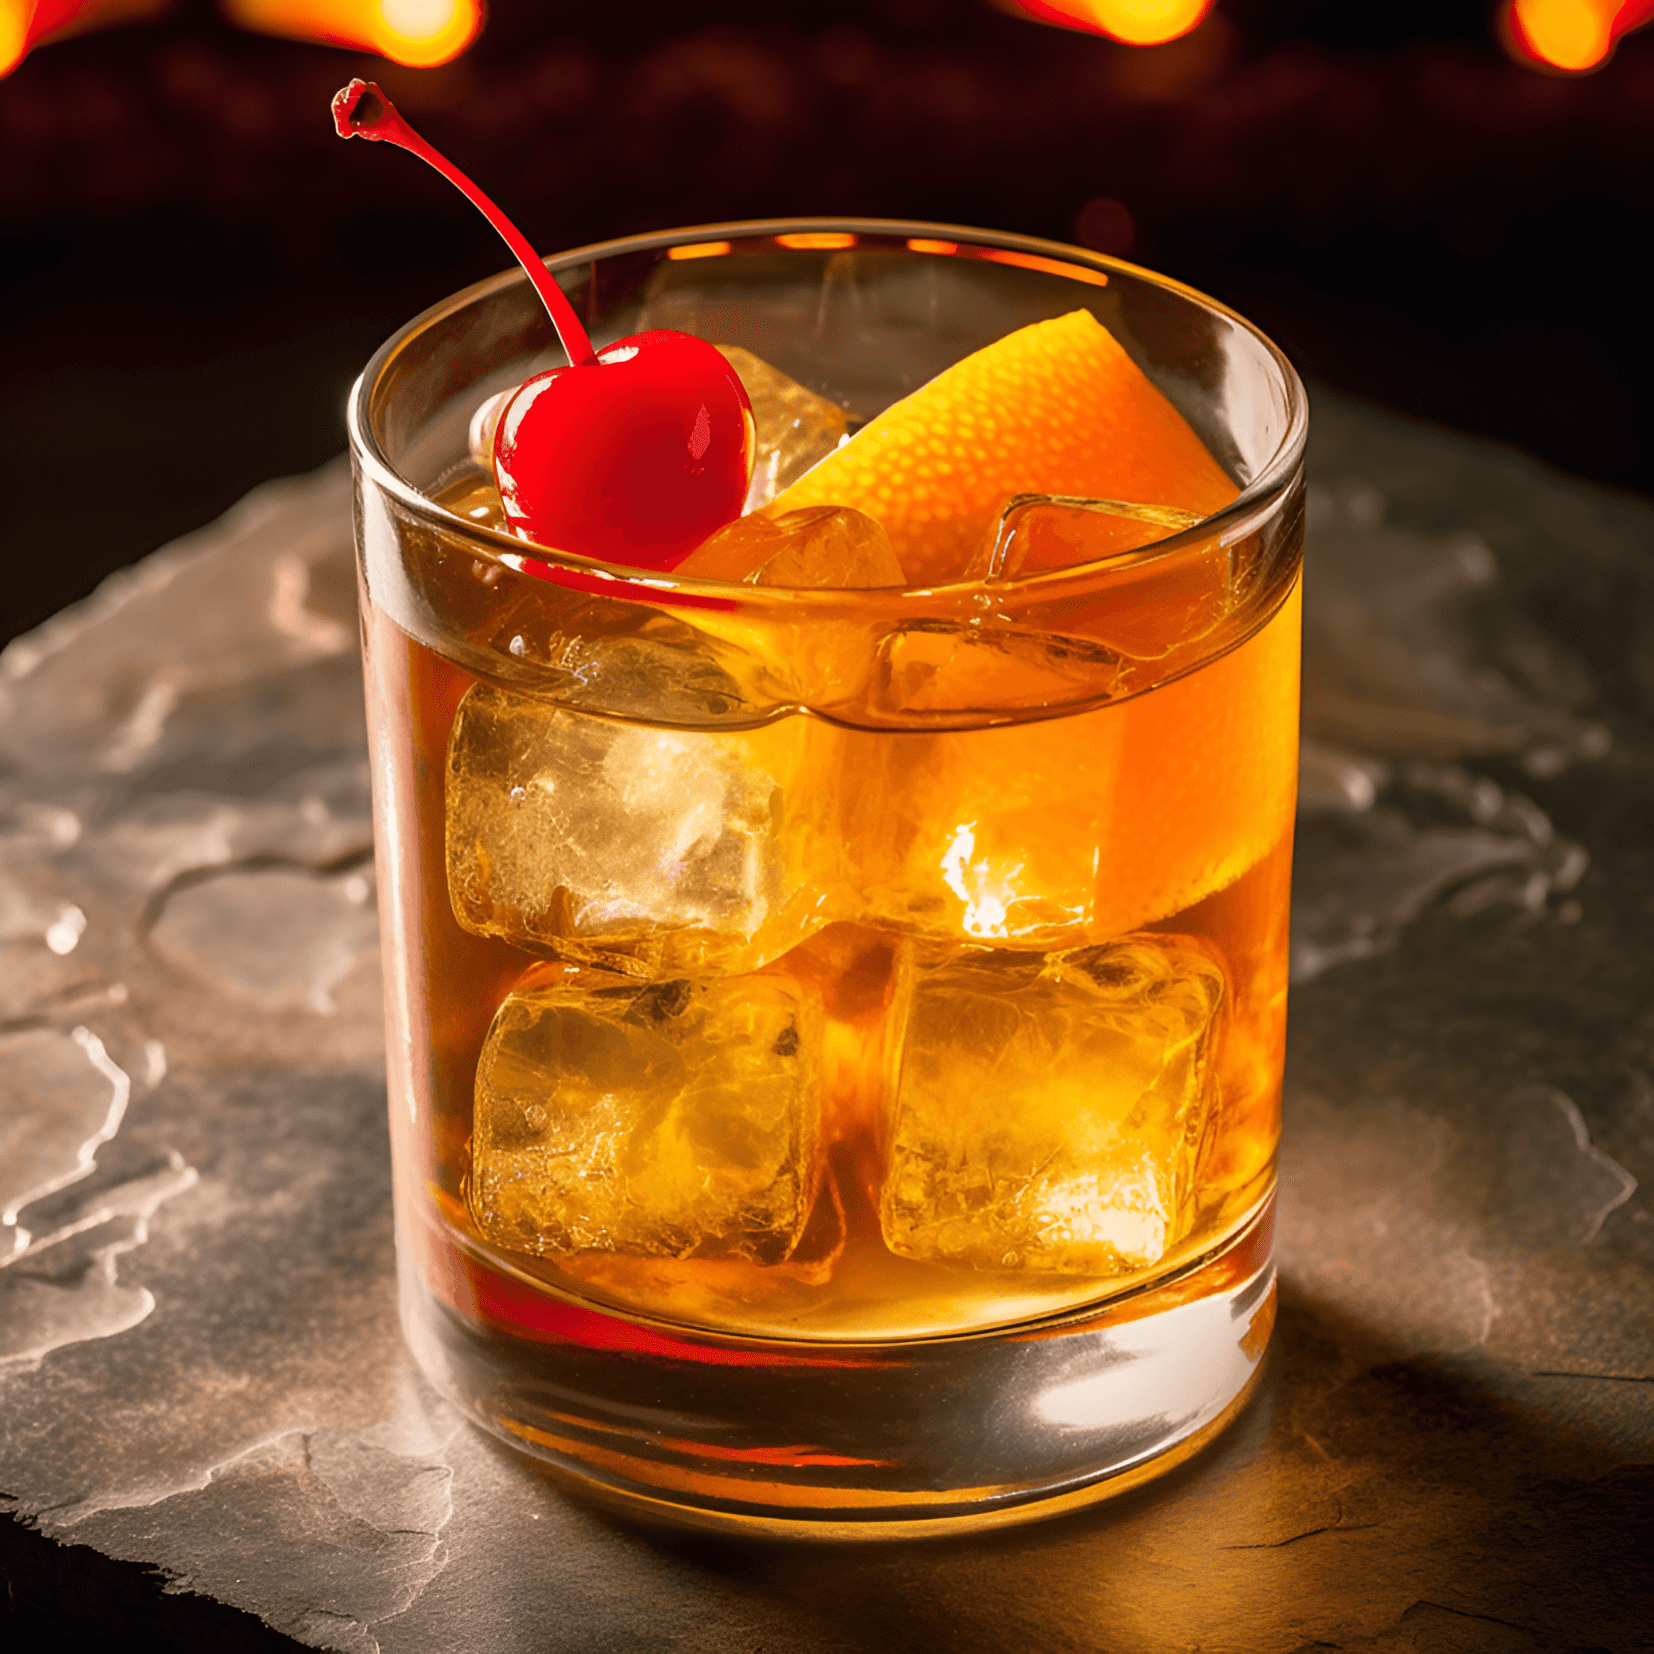 The Amaretto Stone Sour is a delightful blend of sweet, sour, and fruity flavors. The amaretto provides a rich almond sweetness, while the lemon juice and orange juice add a tangy citrus kick. The cocktail is smooth and refreshing, with a hint of warmth from the amaretto.